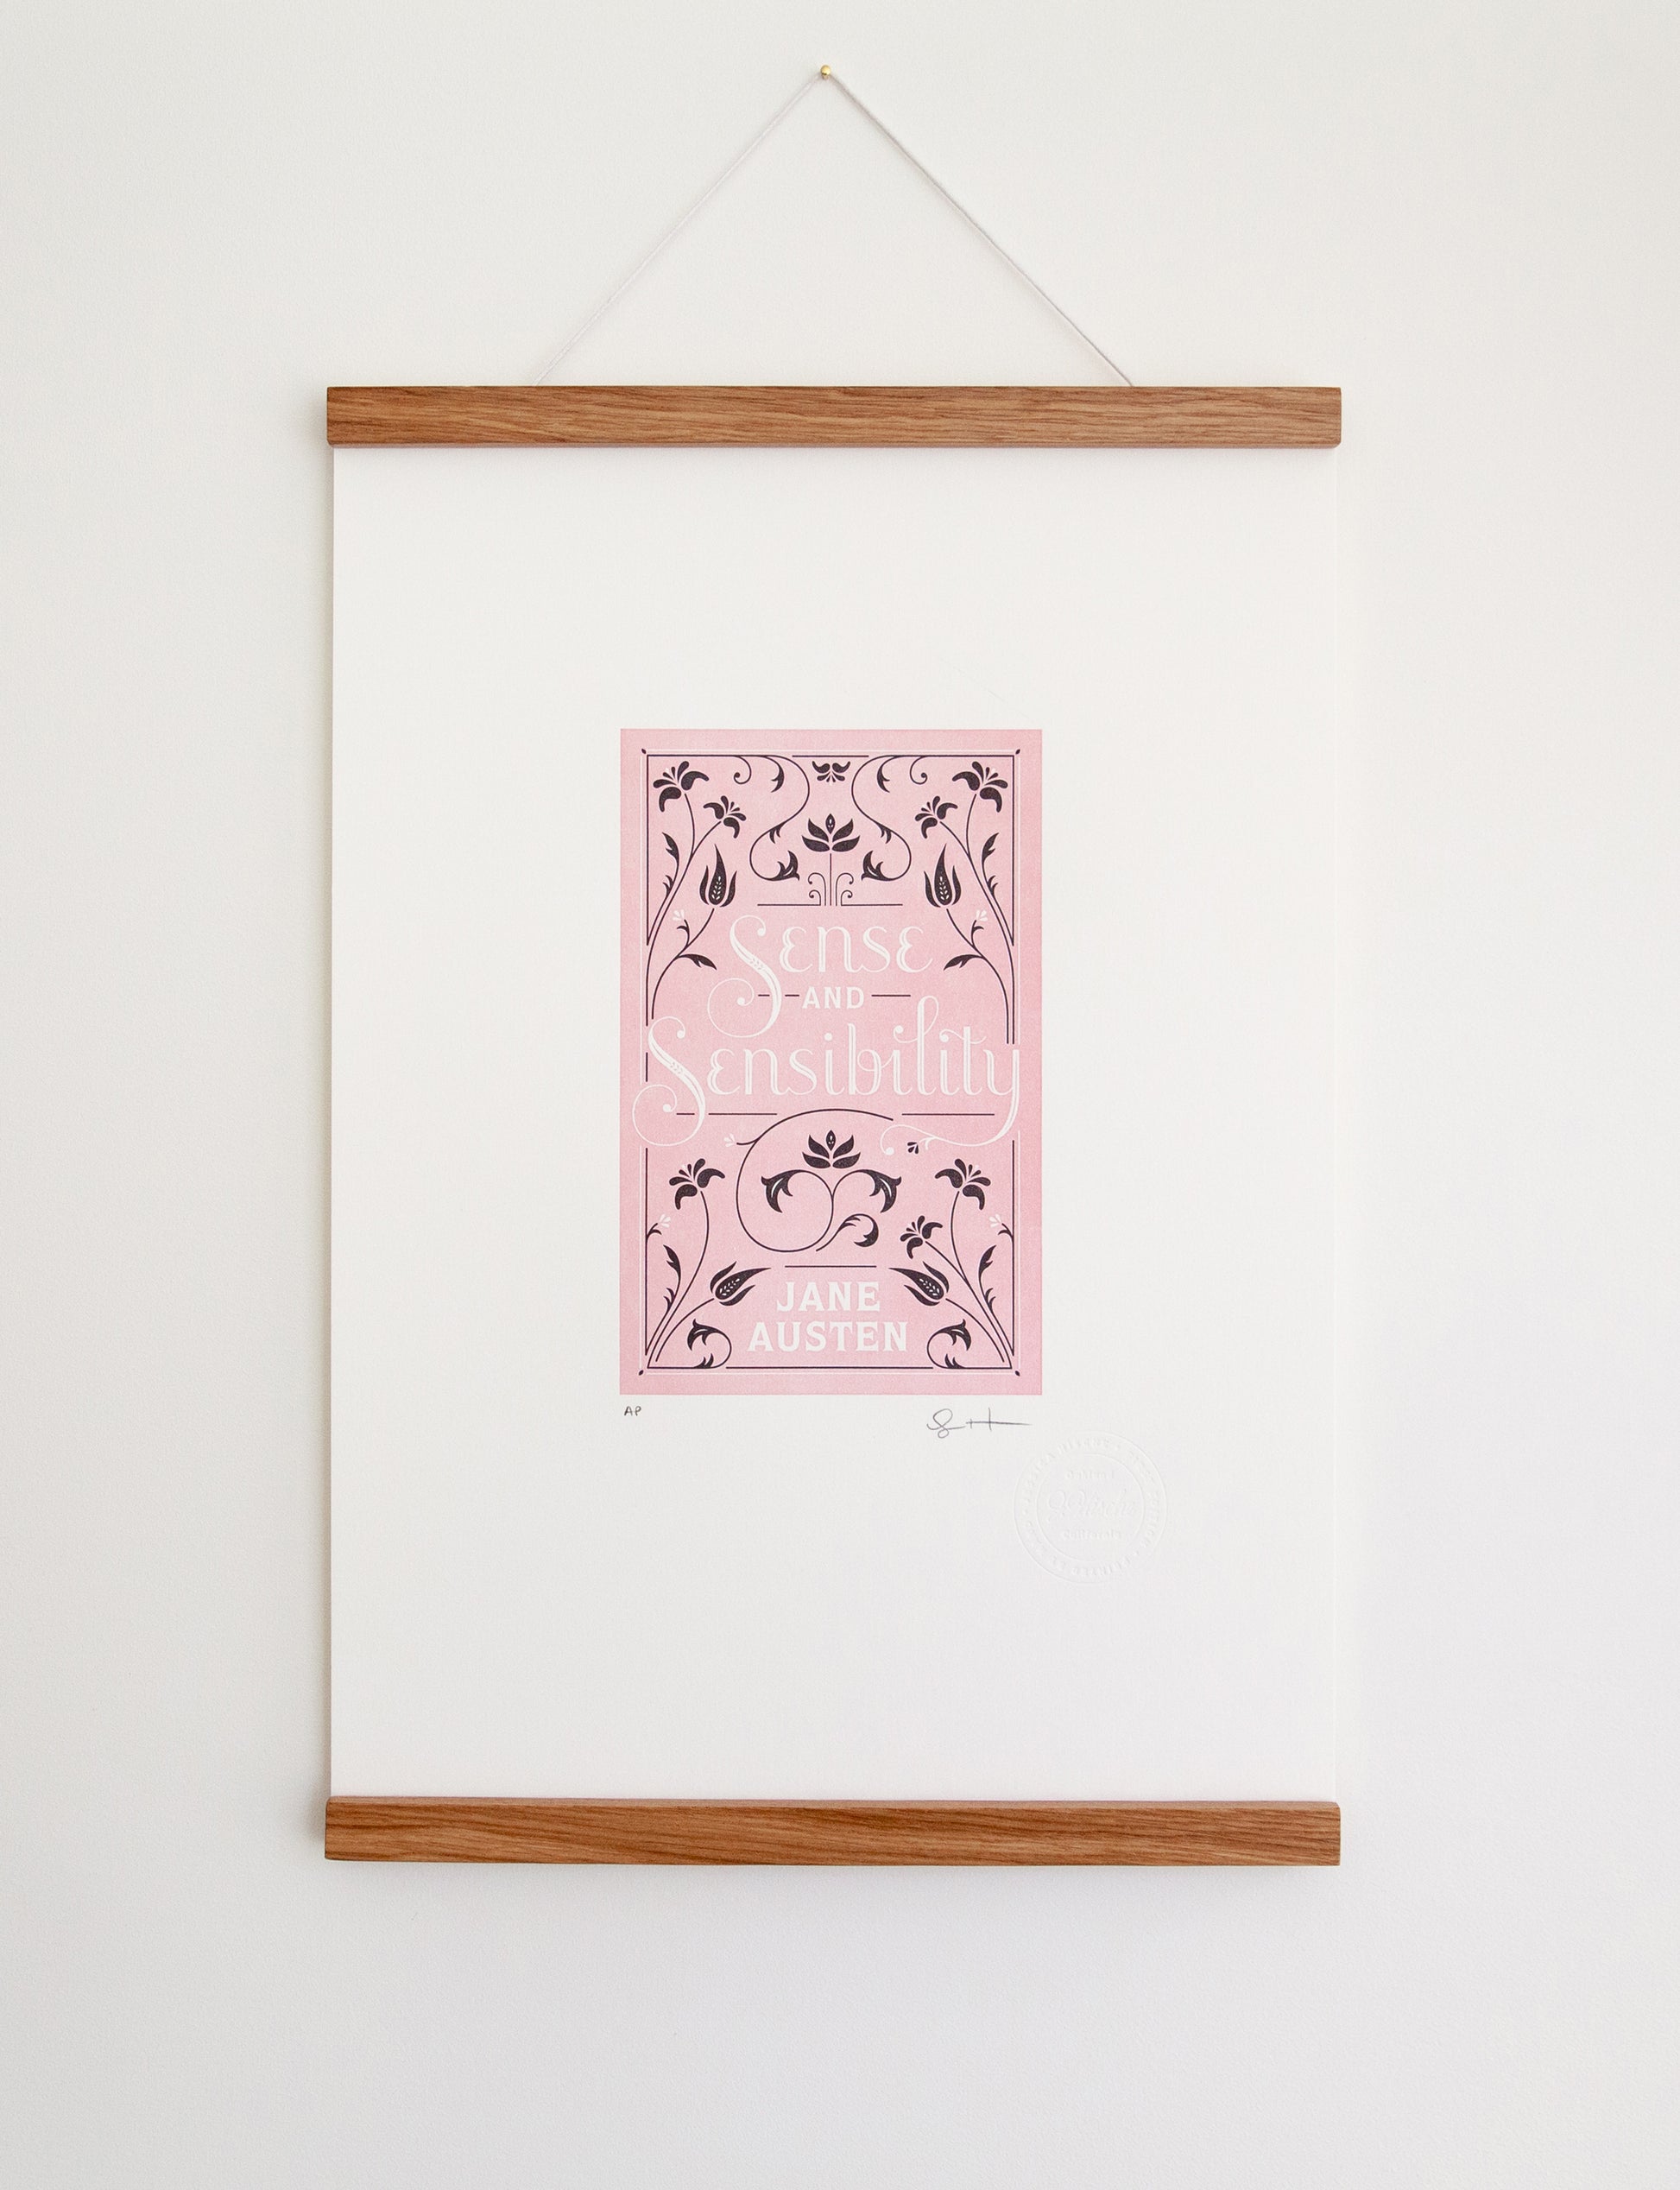 Framed 2-color letterpress print in pink and black. Printed artwork is an illustrated book cover of Sense and Sensibility including custom hand lettering.